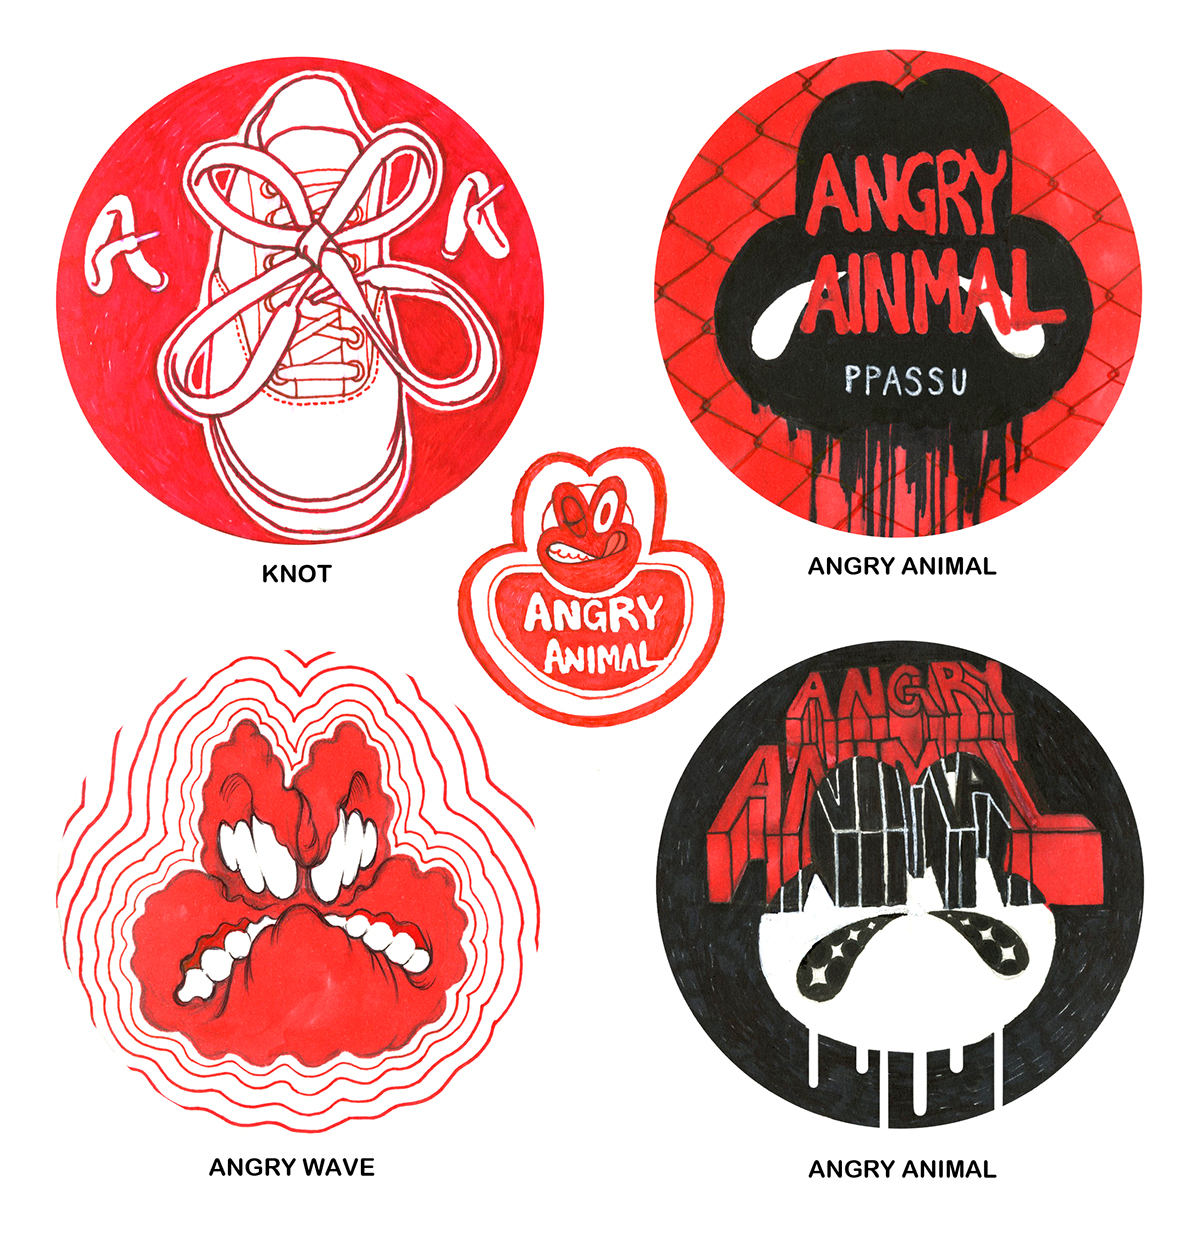 angry Aniaml rage explosion rainy day maka patch design annual ring skull x